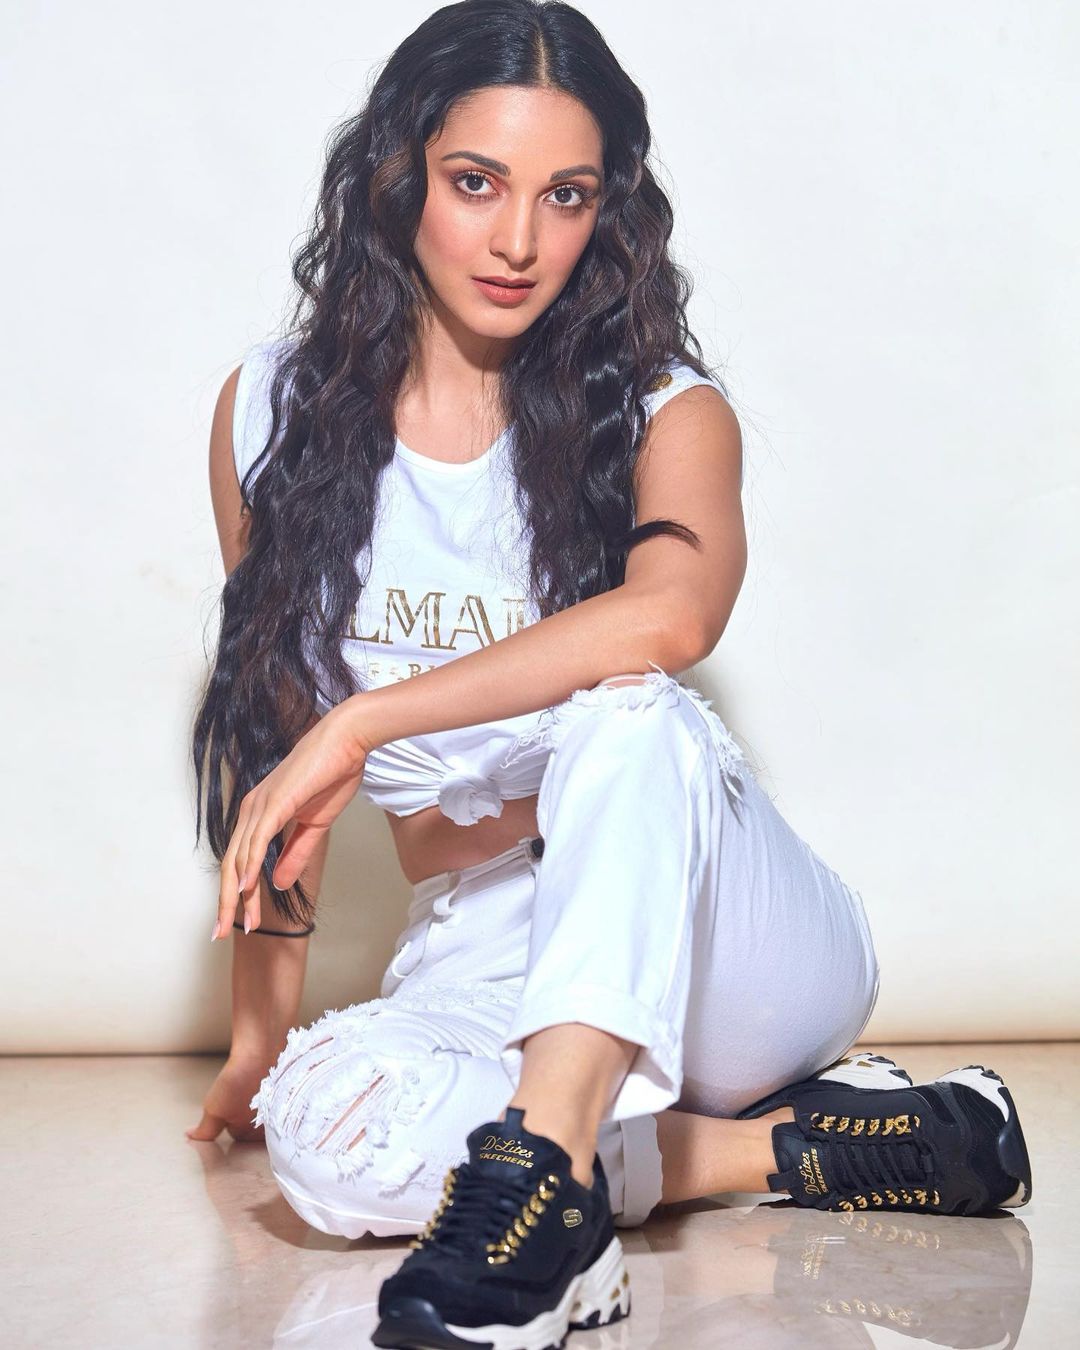 Kiara Advani looks smart in the white tee and matching distressed jeans